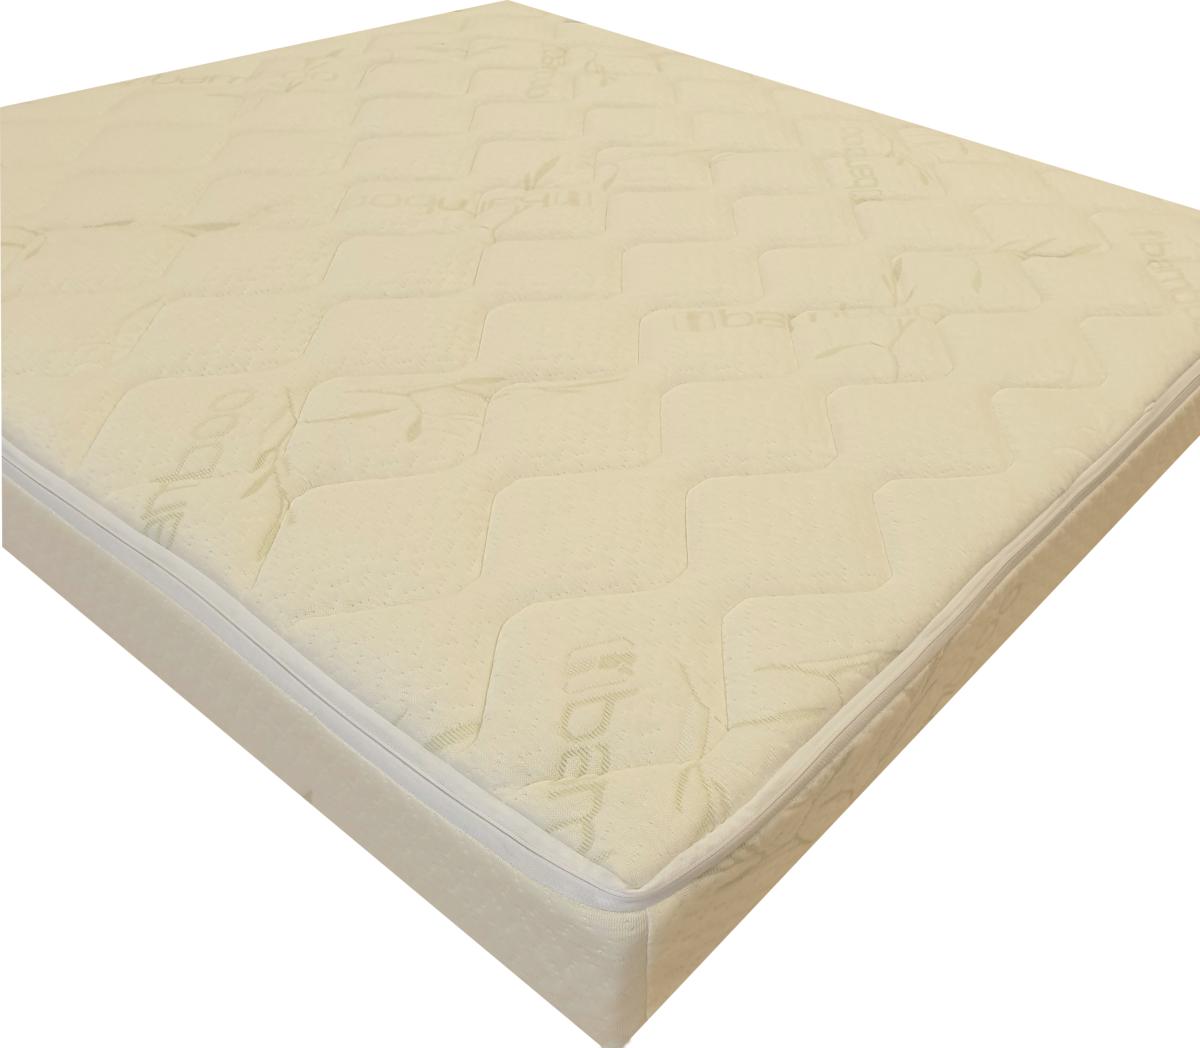 Air-conditioned mattress for playpen 95x95x5 cm